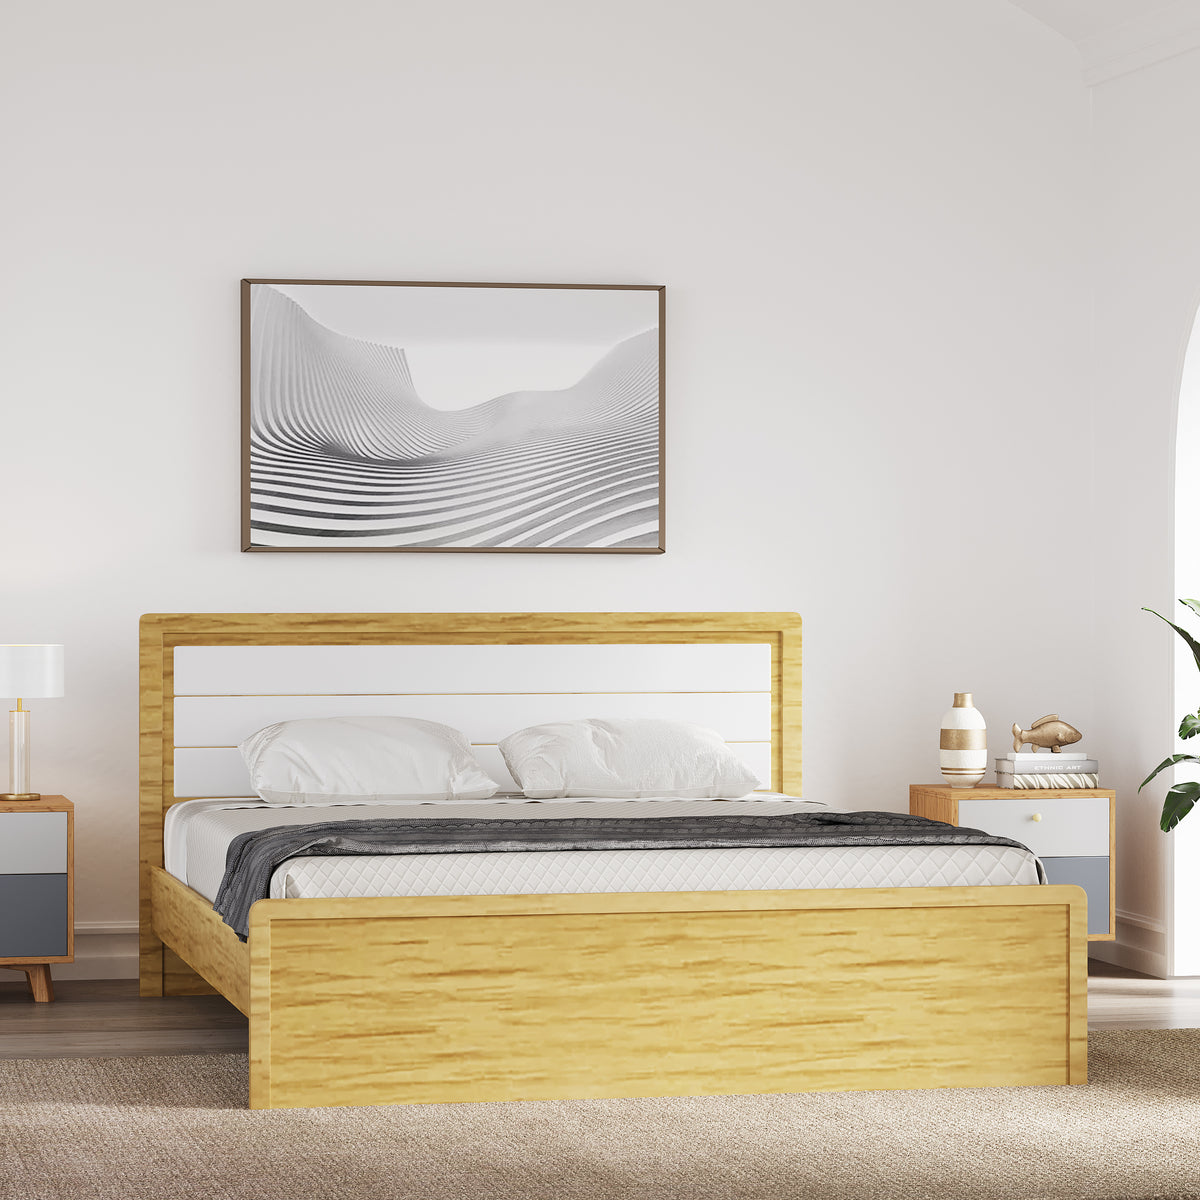 ESTRE Cracus King Size Bed In Urban Teak With Frosty White Colour